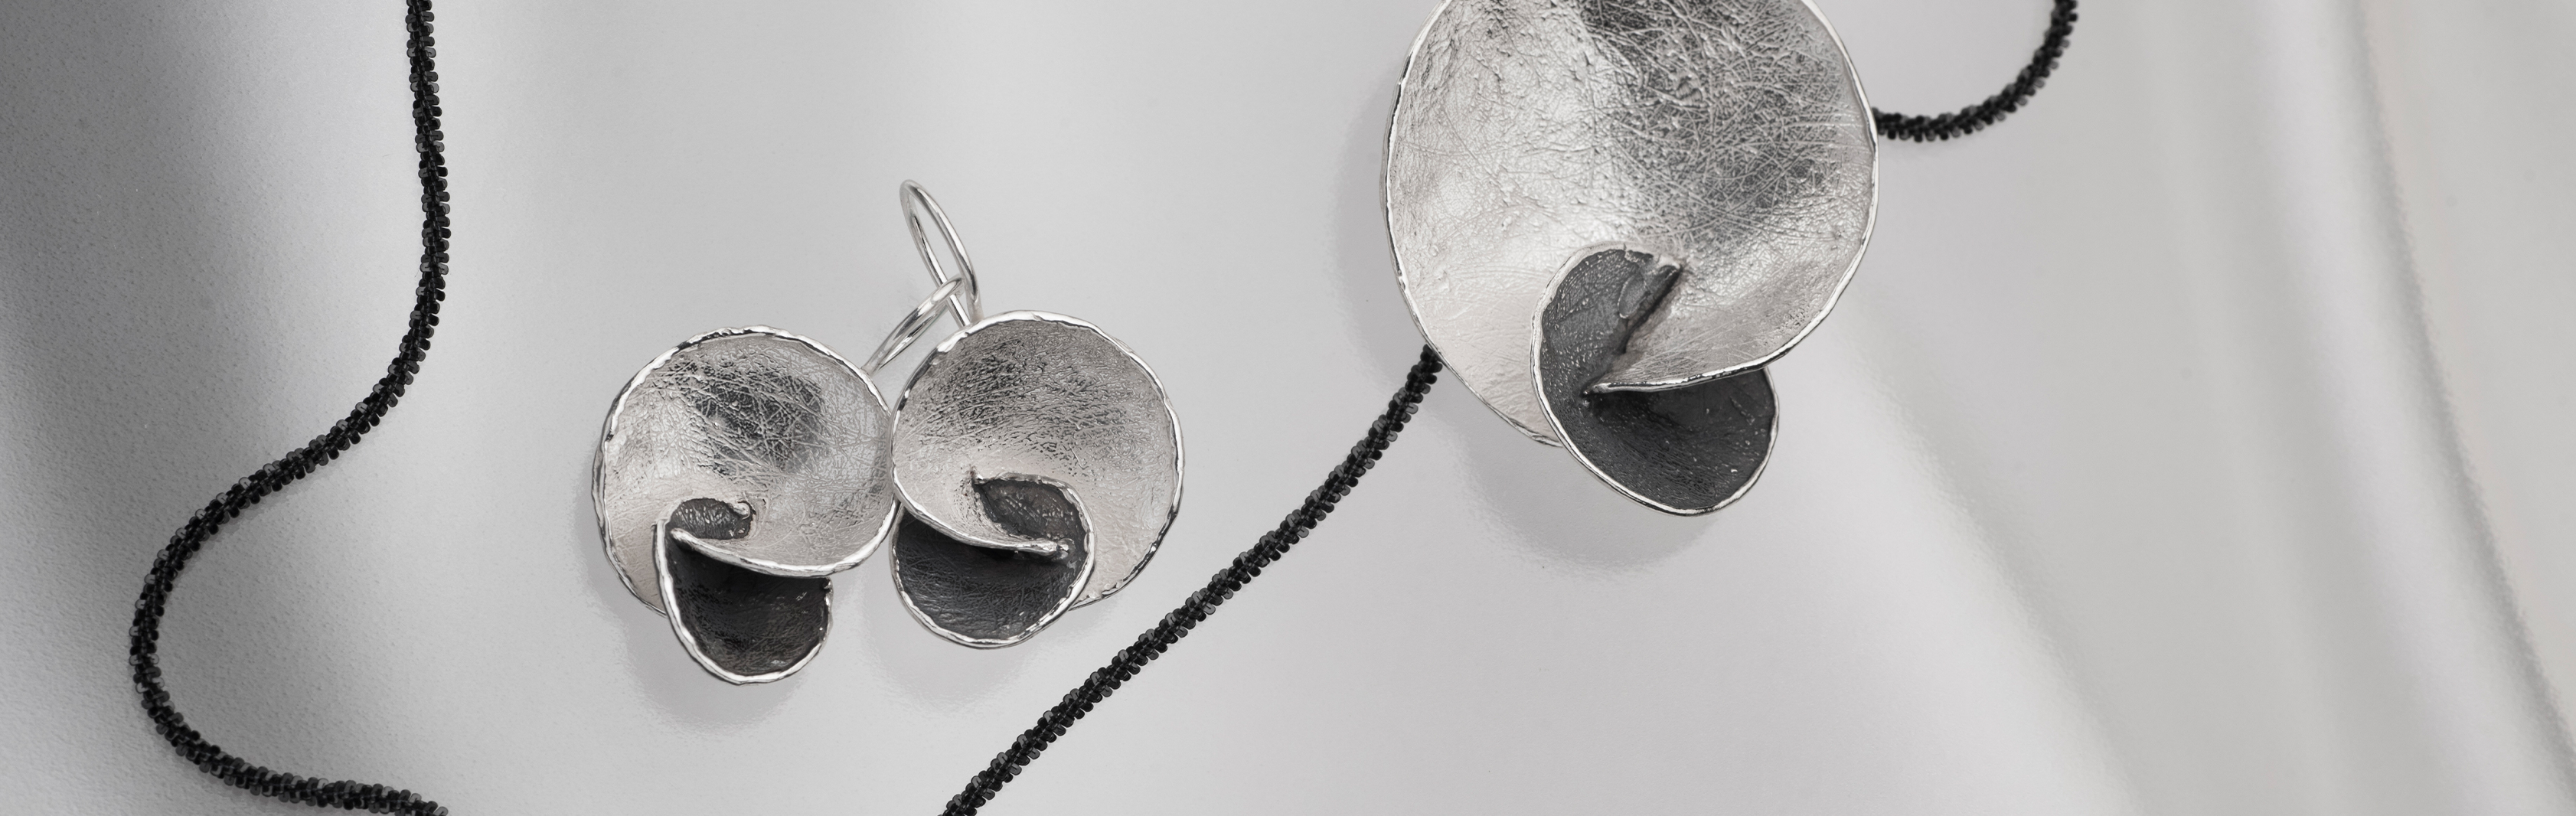 Yin and Yang Collection | White & Oxidized Silver Jewelry